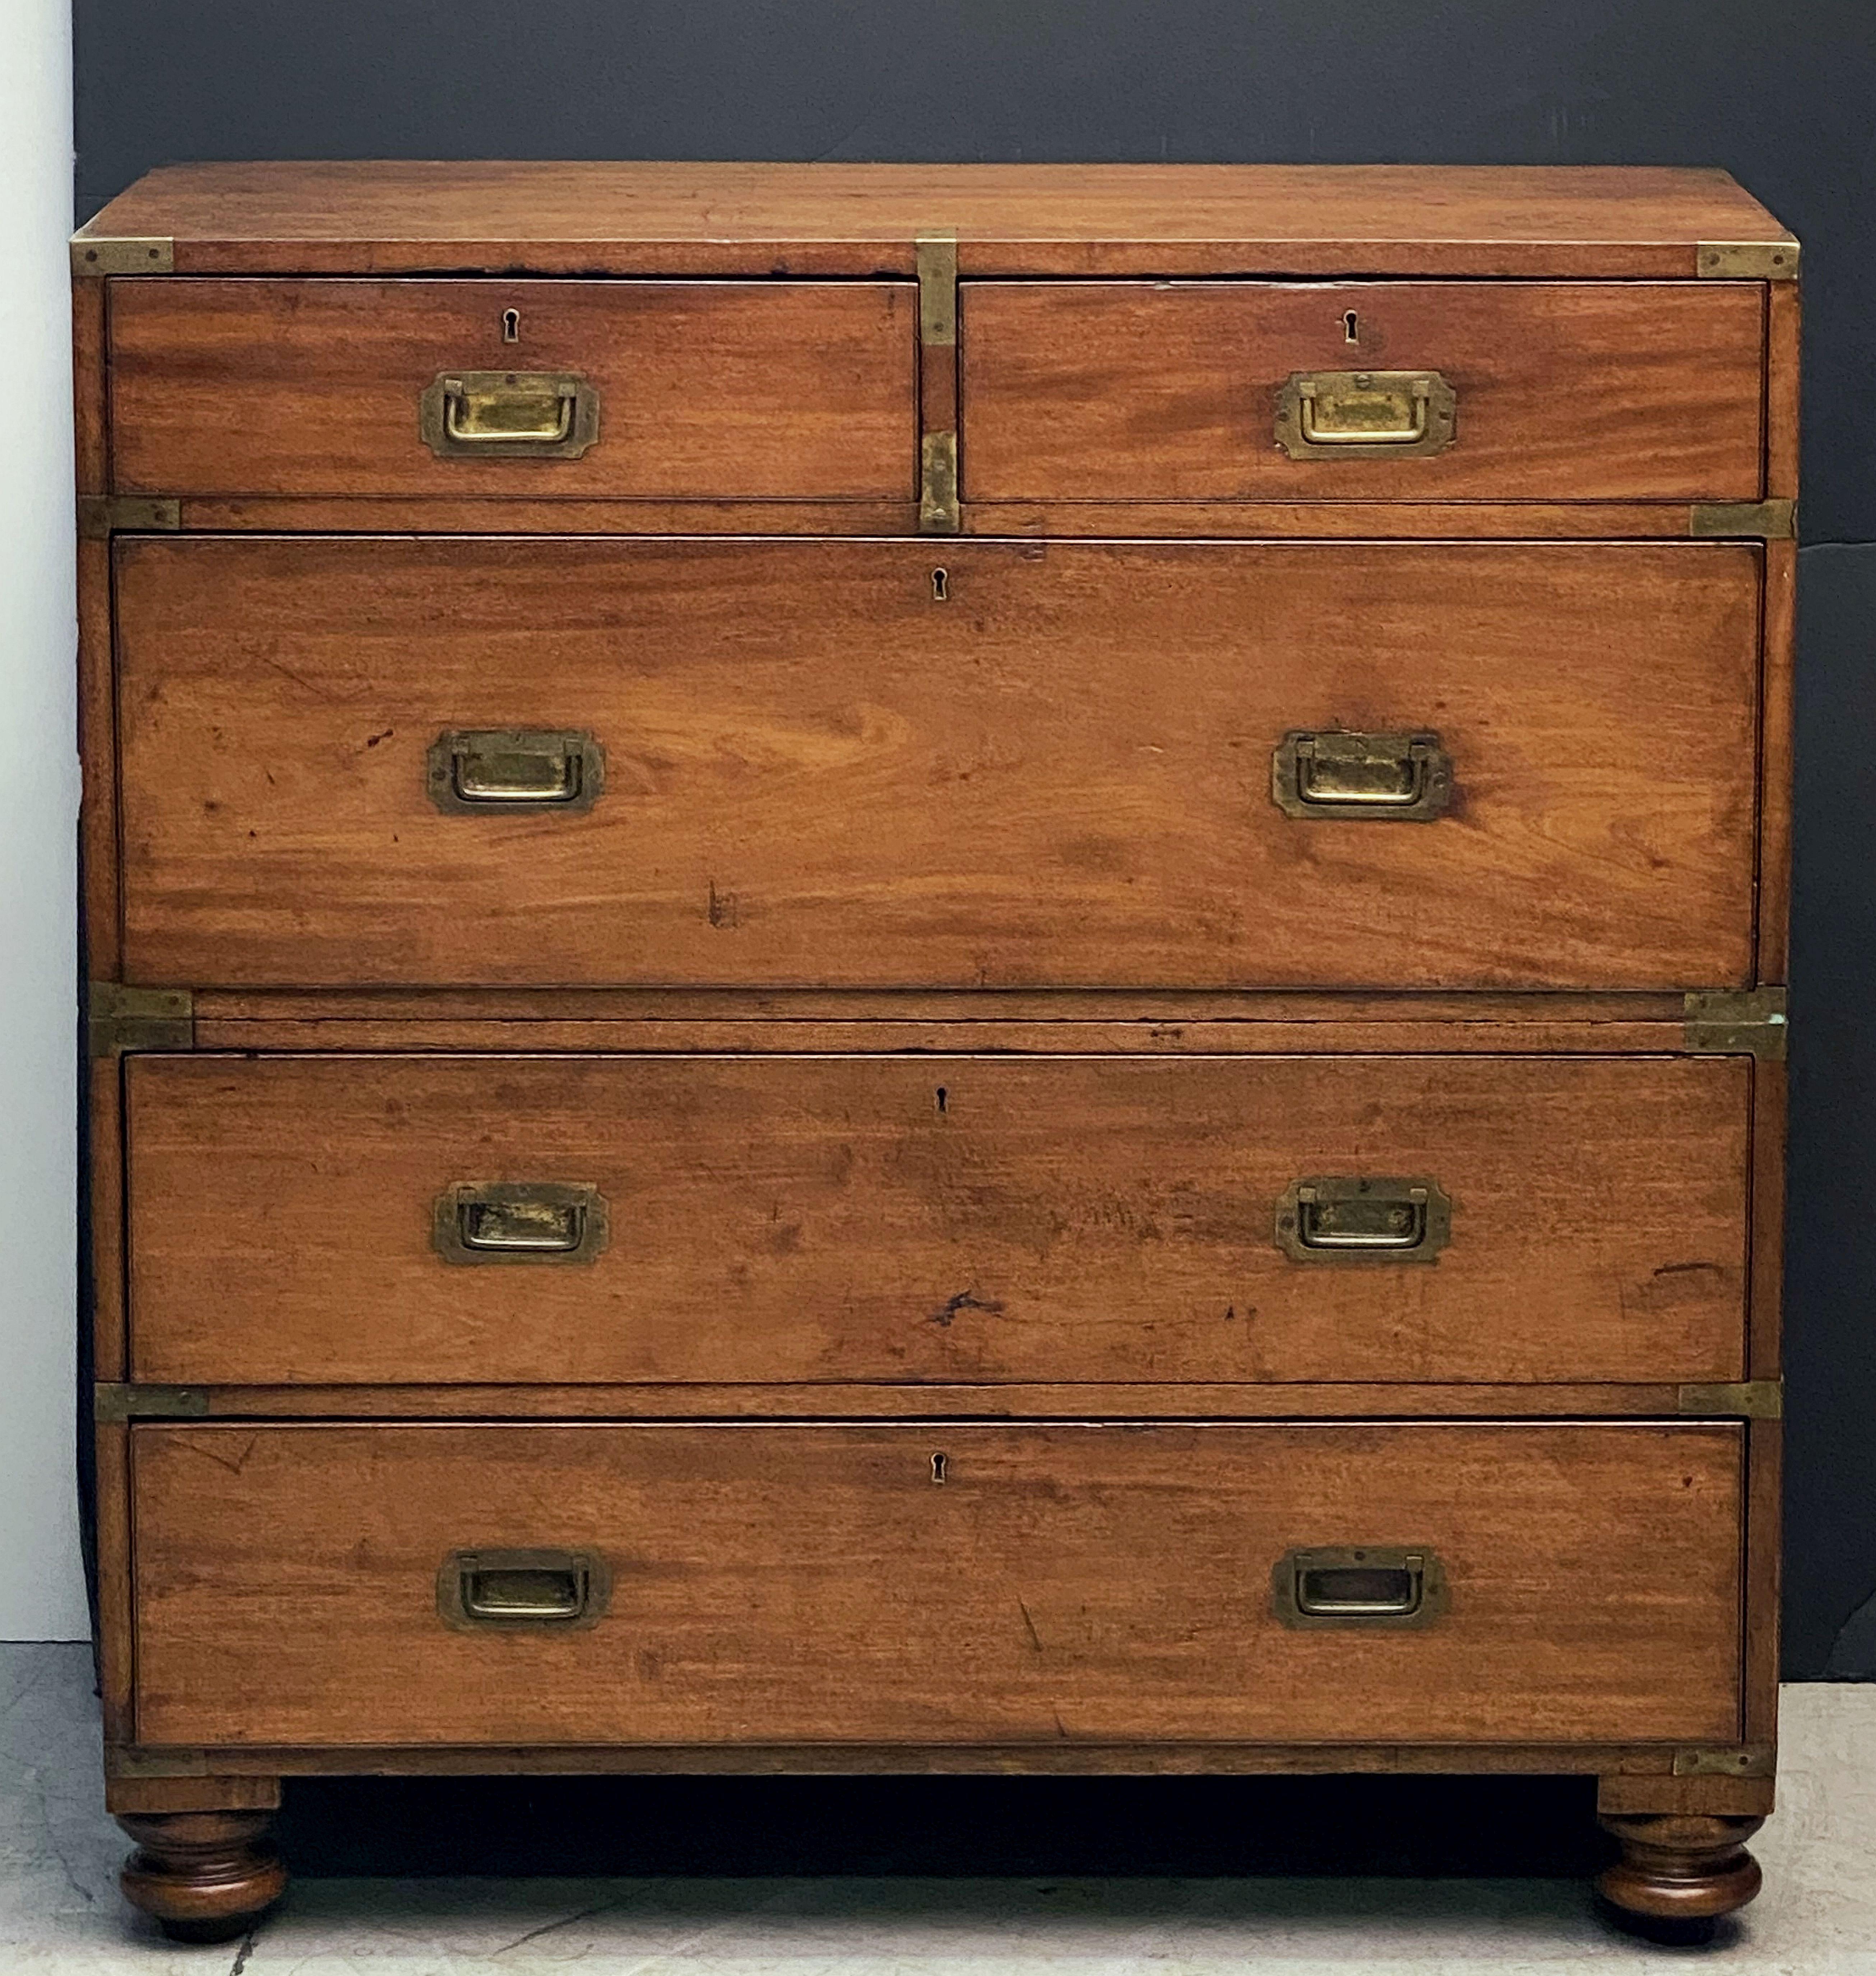 A fine English military officer’s campaign ware chest, featuring a handsome mahogany exterior, showing two short drawers over three long drawers.
The brass-bound chest, in two parts, accented with brass escutcheons and hardware, resting on four